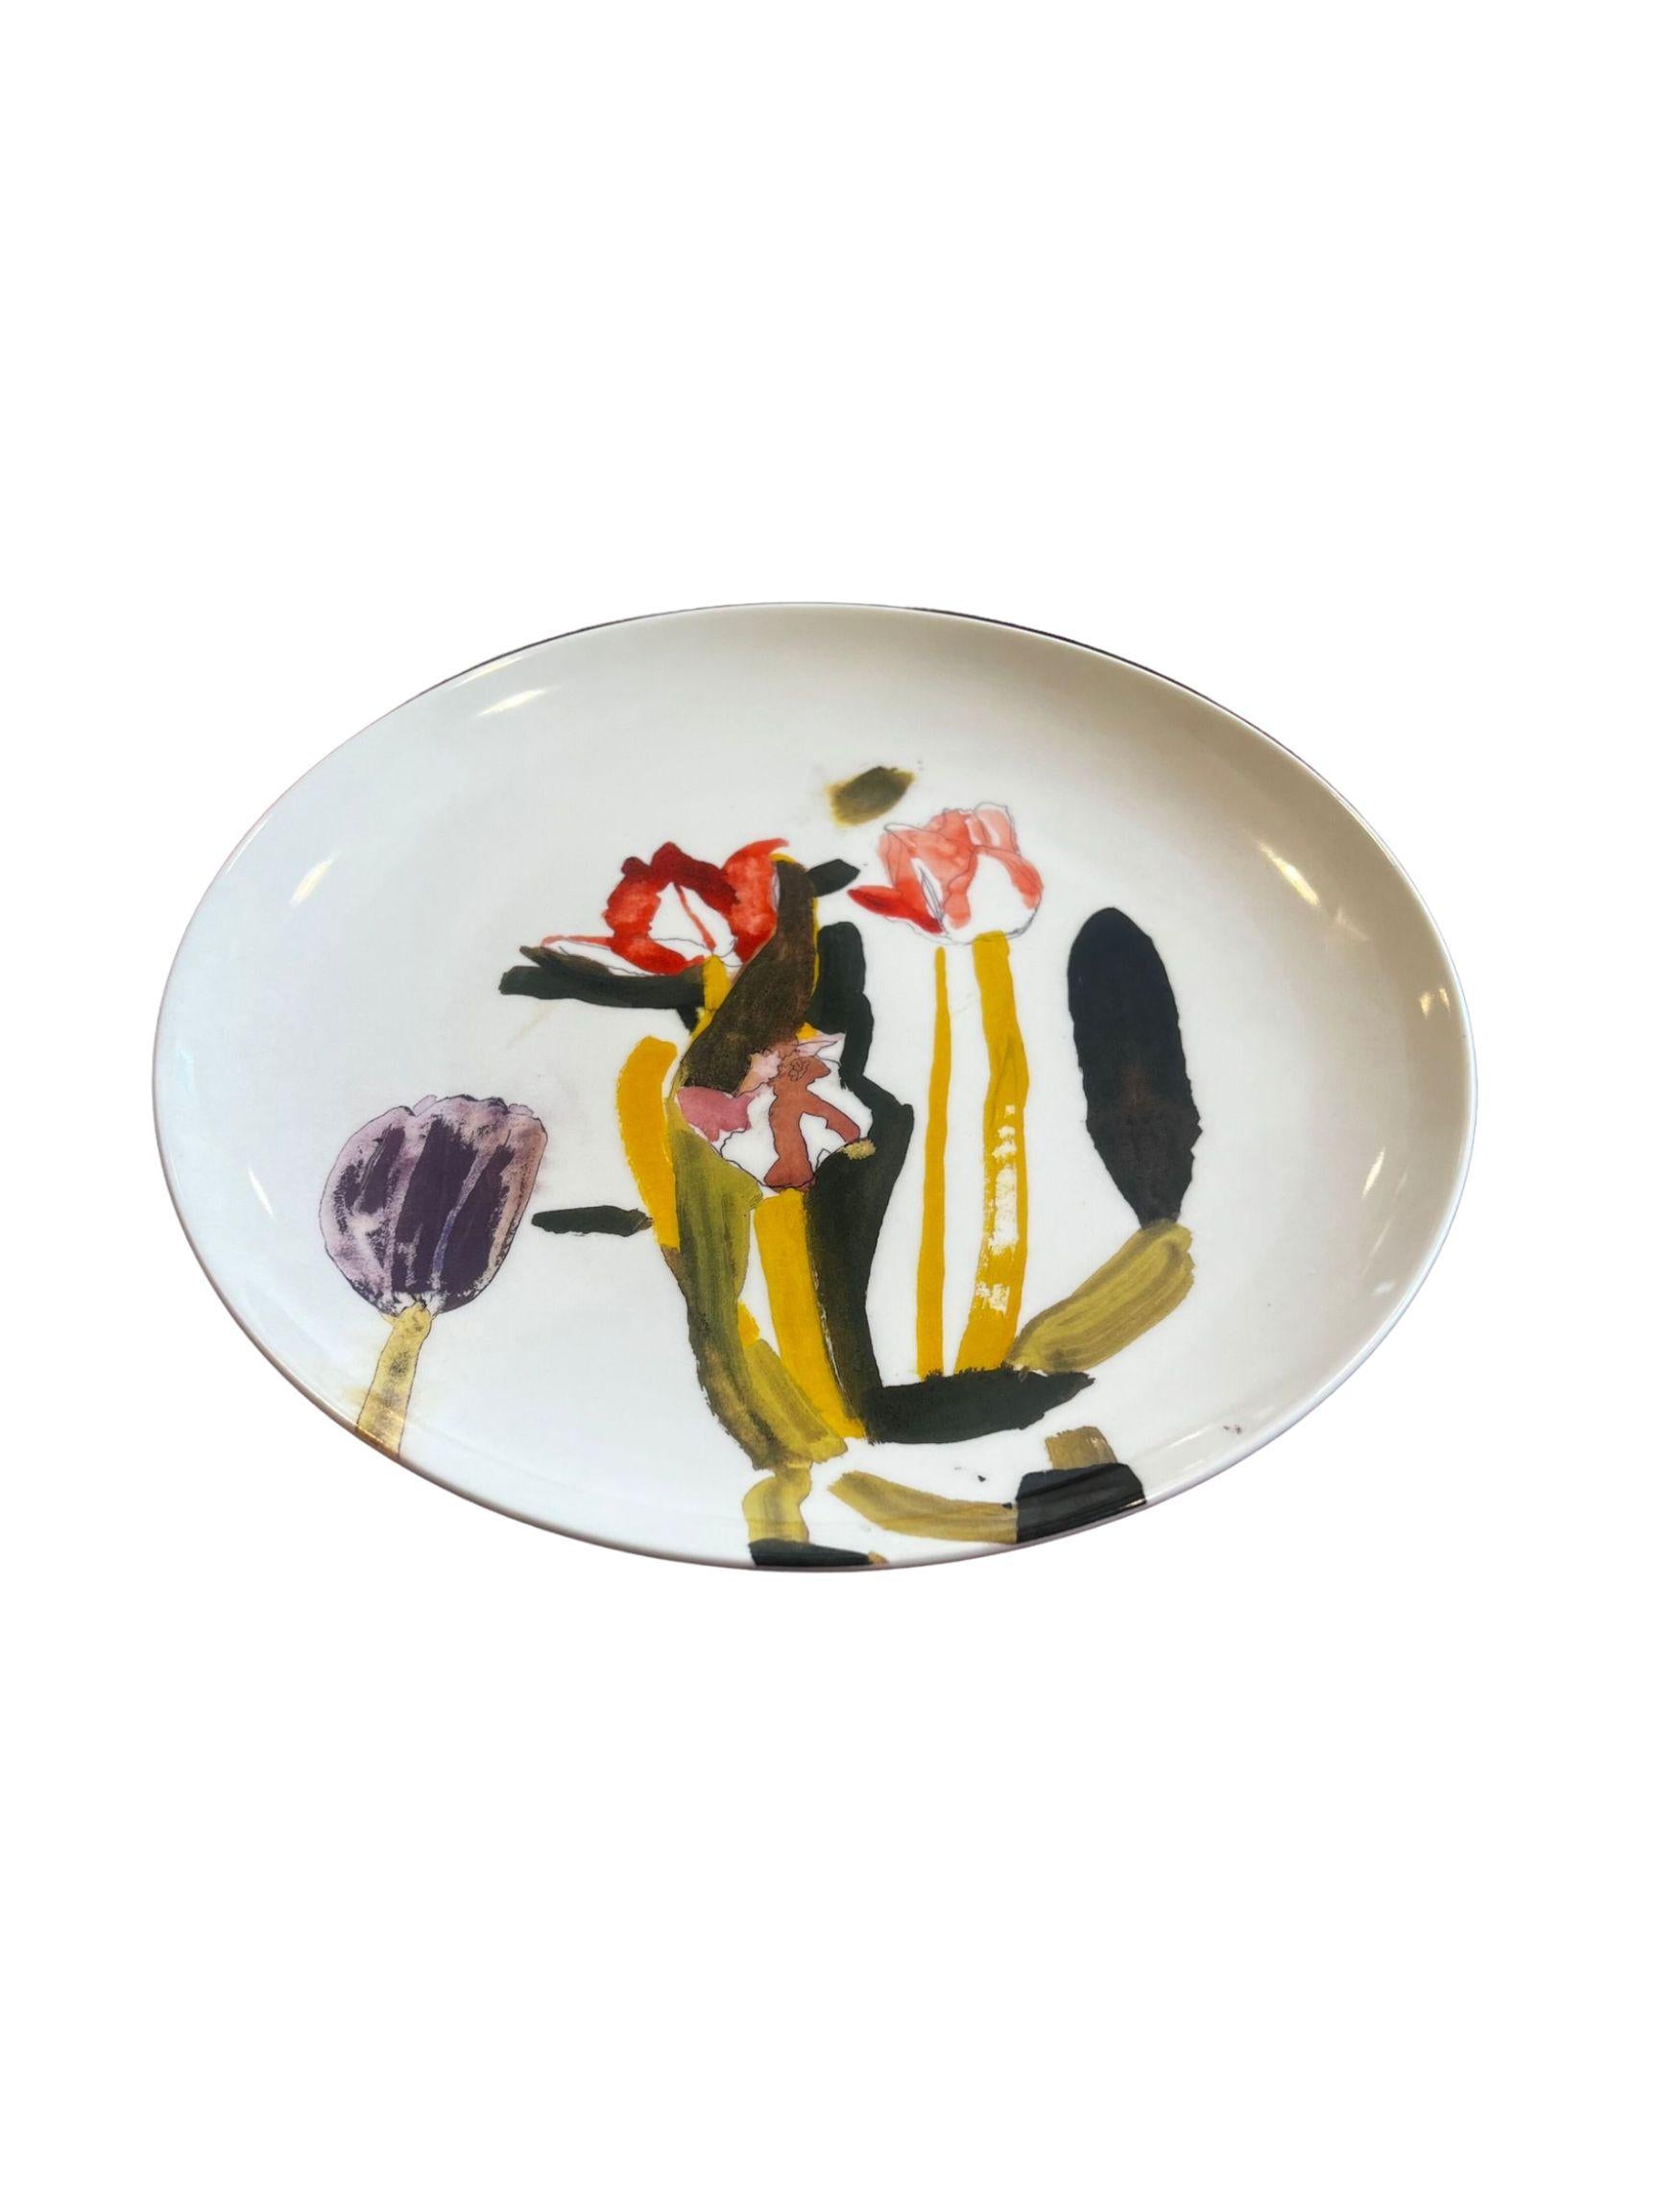 Limited Edition, plate by Amy Sillman, Untitled, 2020. Fine Bone China.
Edition of 250. Part of a limited edition set. 
Printed signature and edition details on verso. 
Custom artist box with printed signature. 
*Dishwasher and microwave safe.